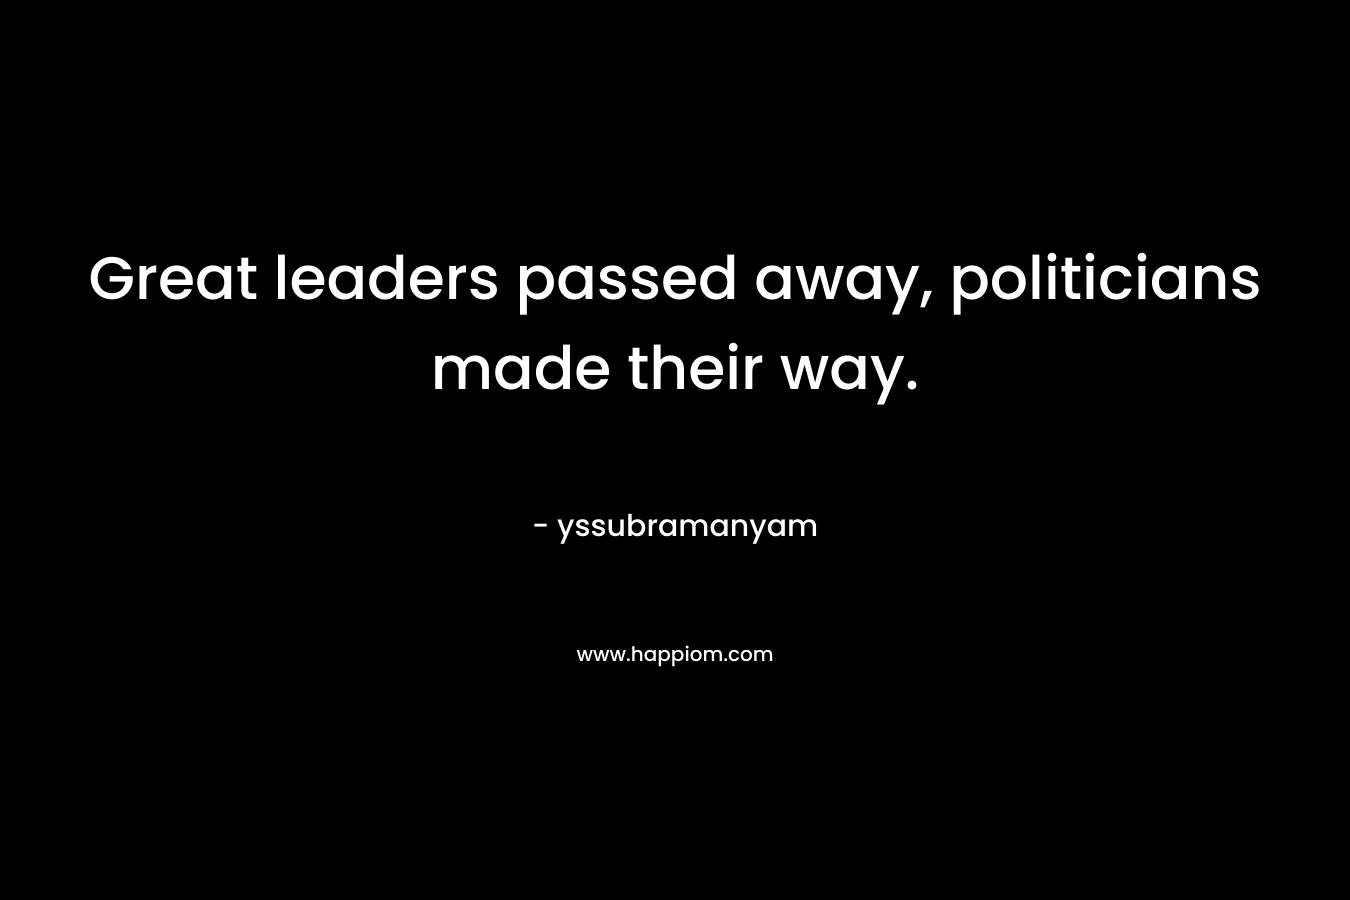 Great leaders passed away, politicians made their way.